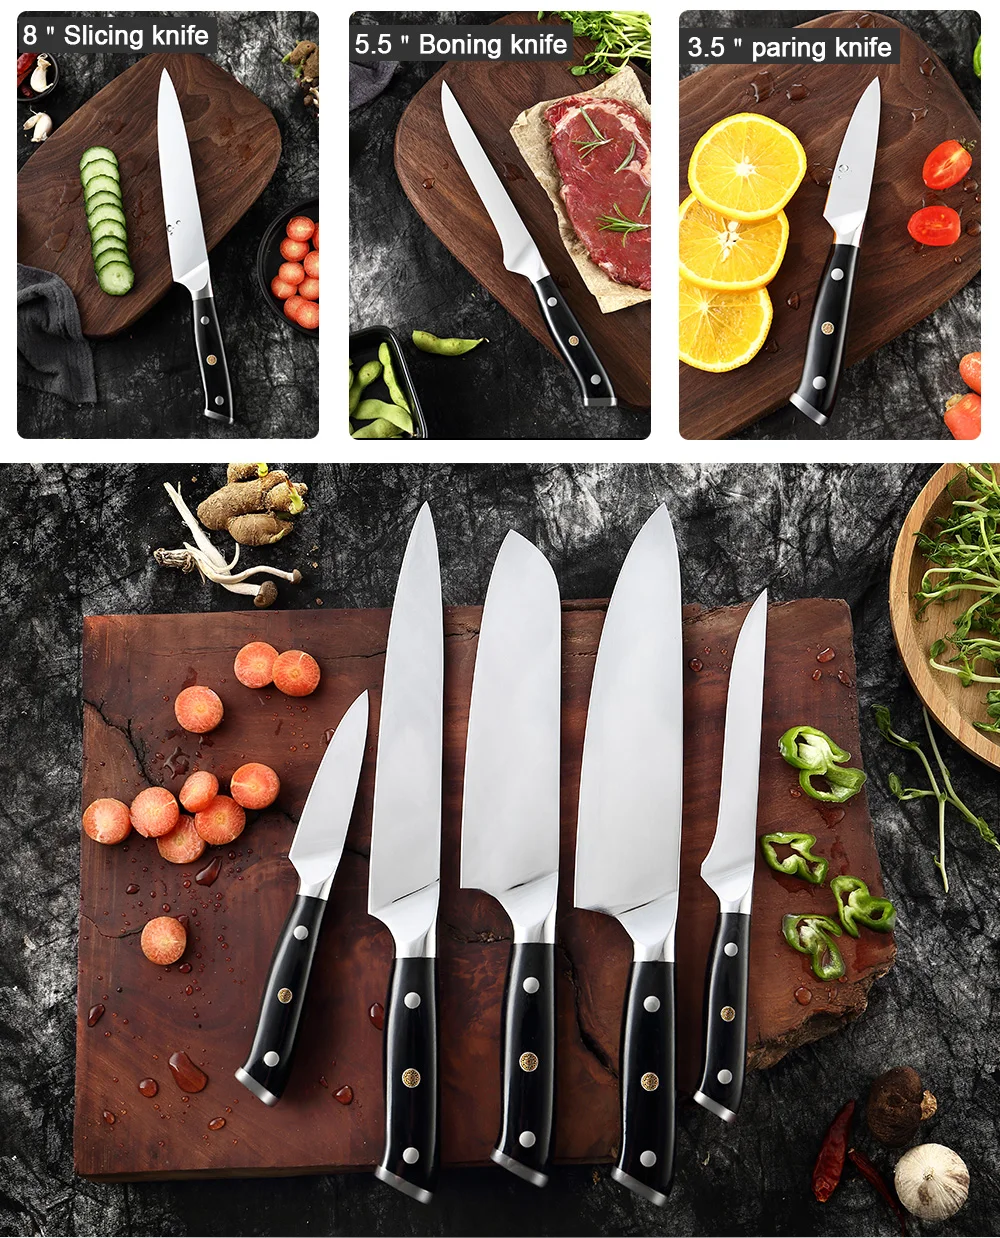 XITUO Stainless Steel Chef Knife High Quality 5 Pcs Kitchen Knife Set  Top Sale Professional Tool Ebony Handle Slicing Knives